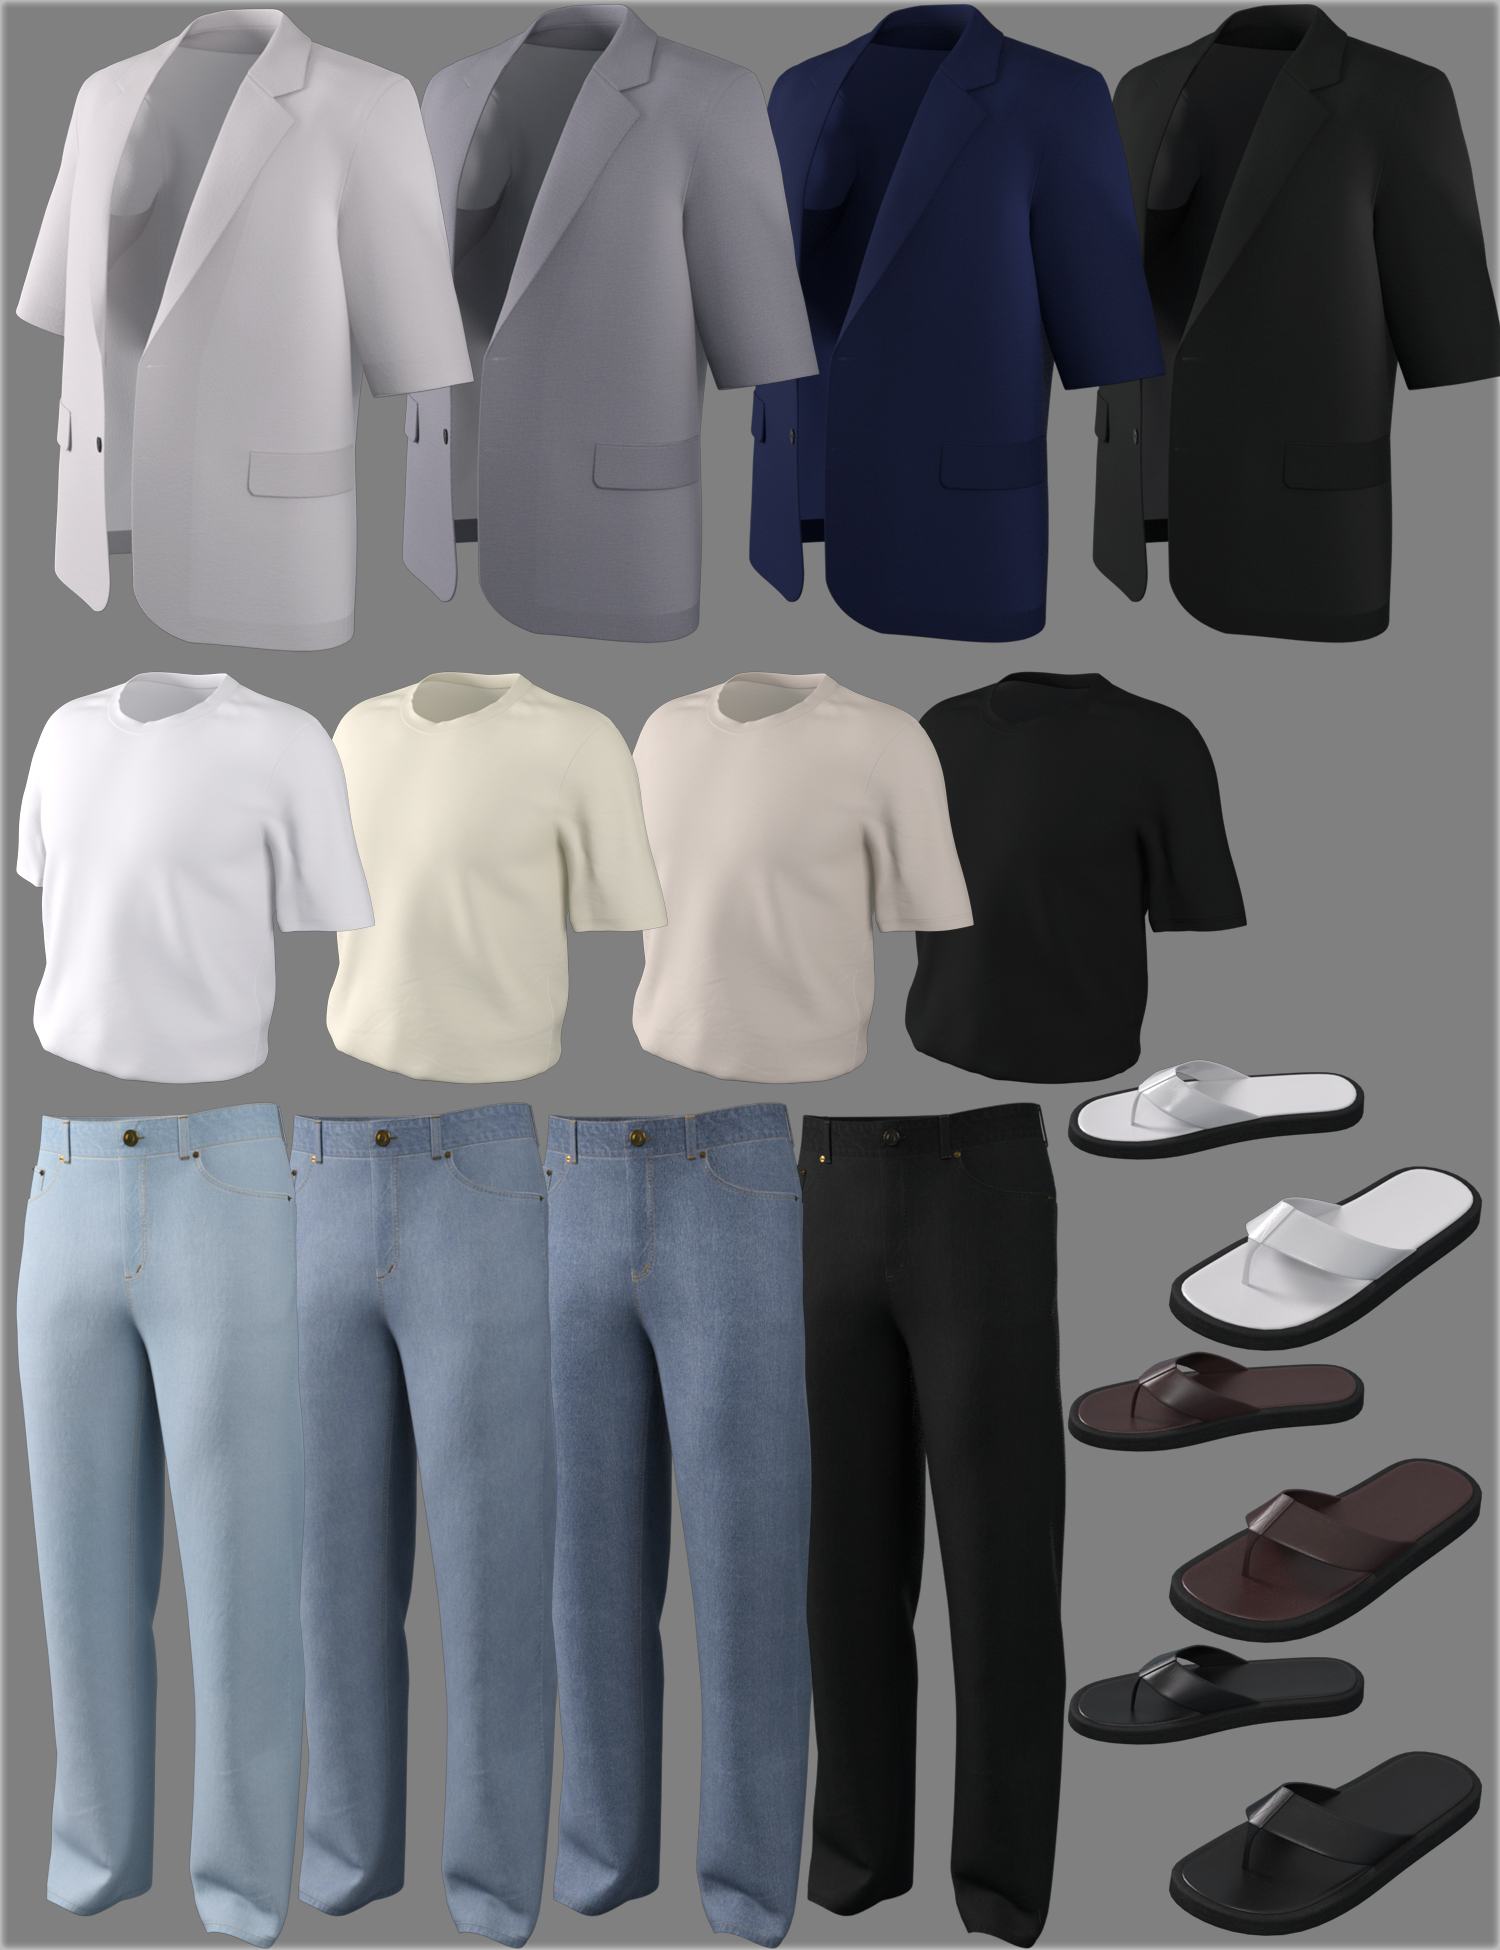 dForce HnC Short Sleeve Jacket Outfits for Genesis 8.1 Males by: IH Kang, 3D Models by Daz 3D